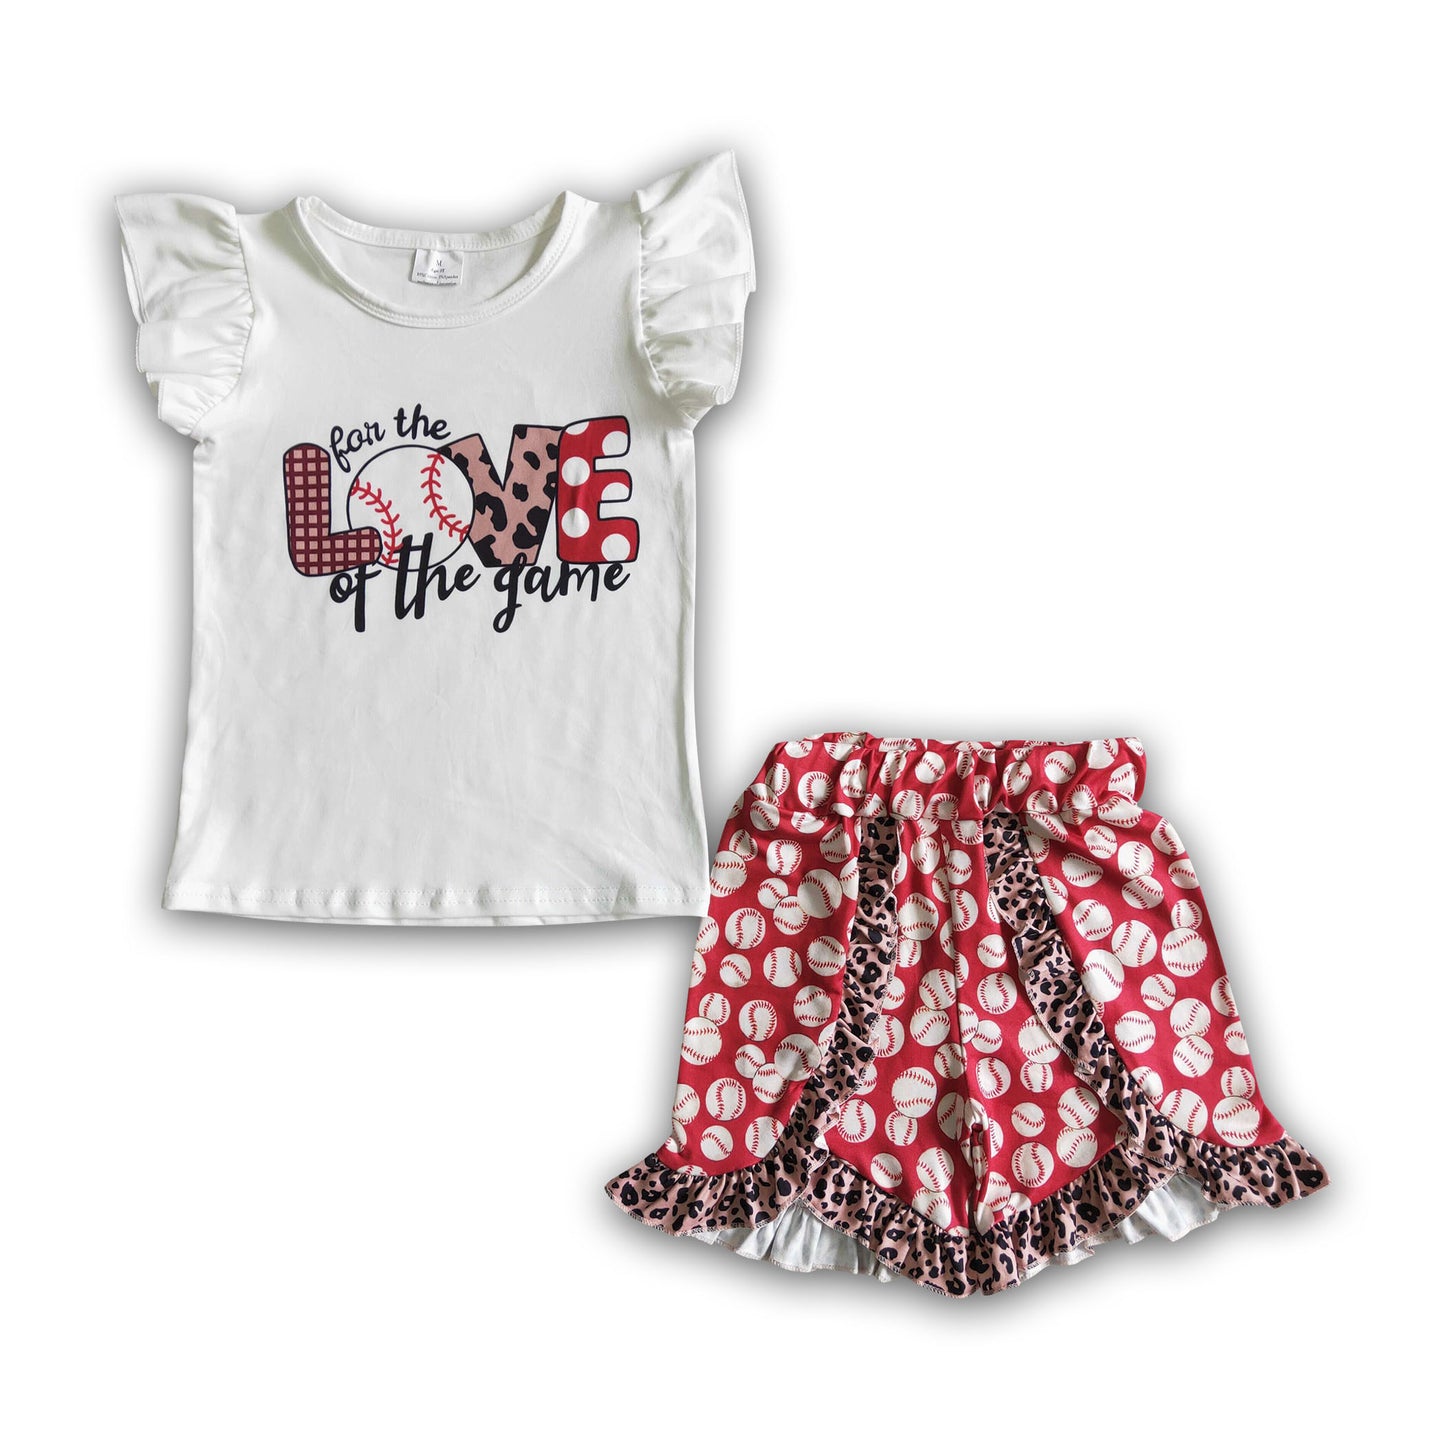 Love of the game shirit baseball shorts girls boutique outfits